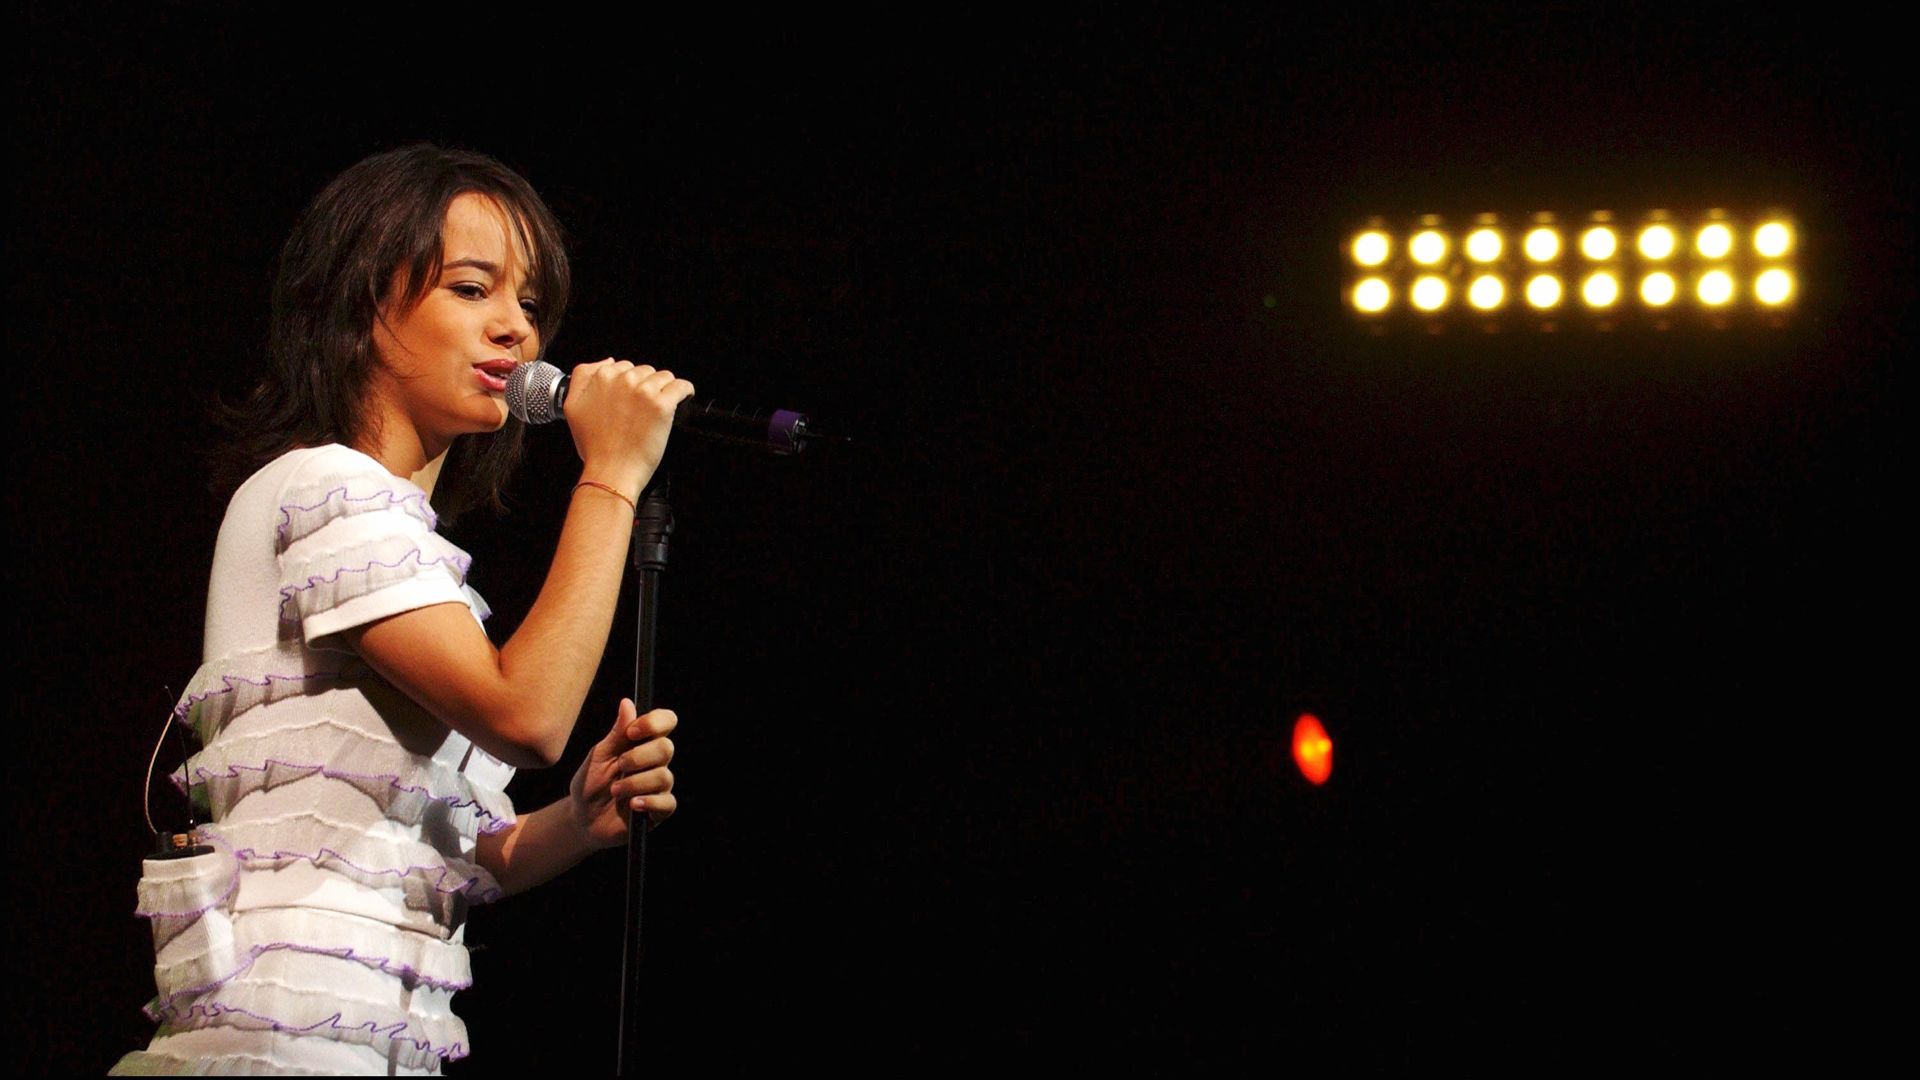 Singer Alizee wallpapers and images - wallpapers, pictures, photos